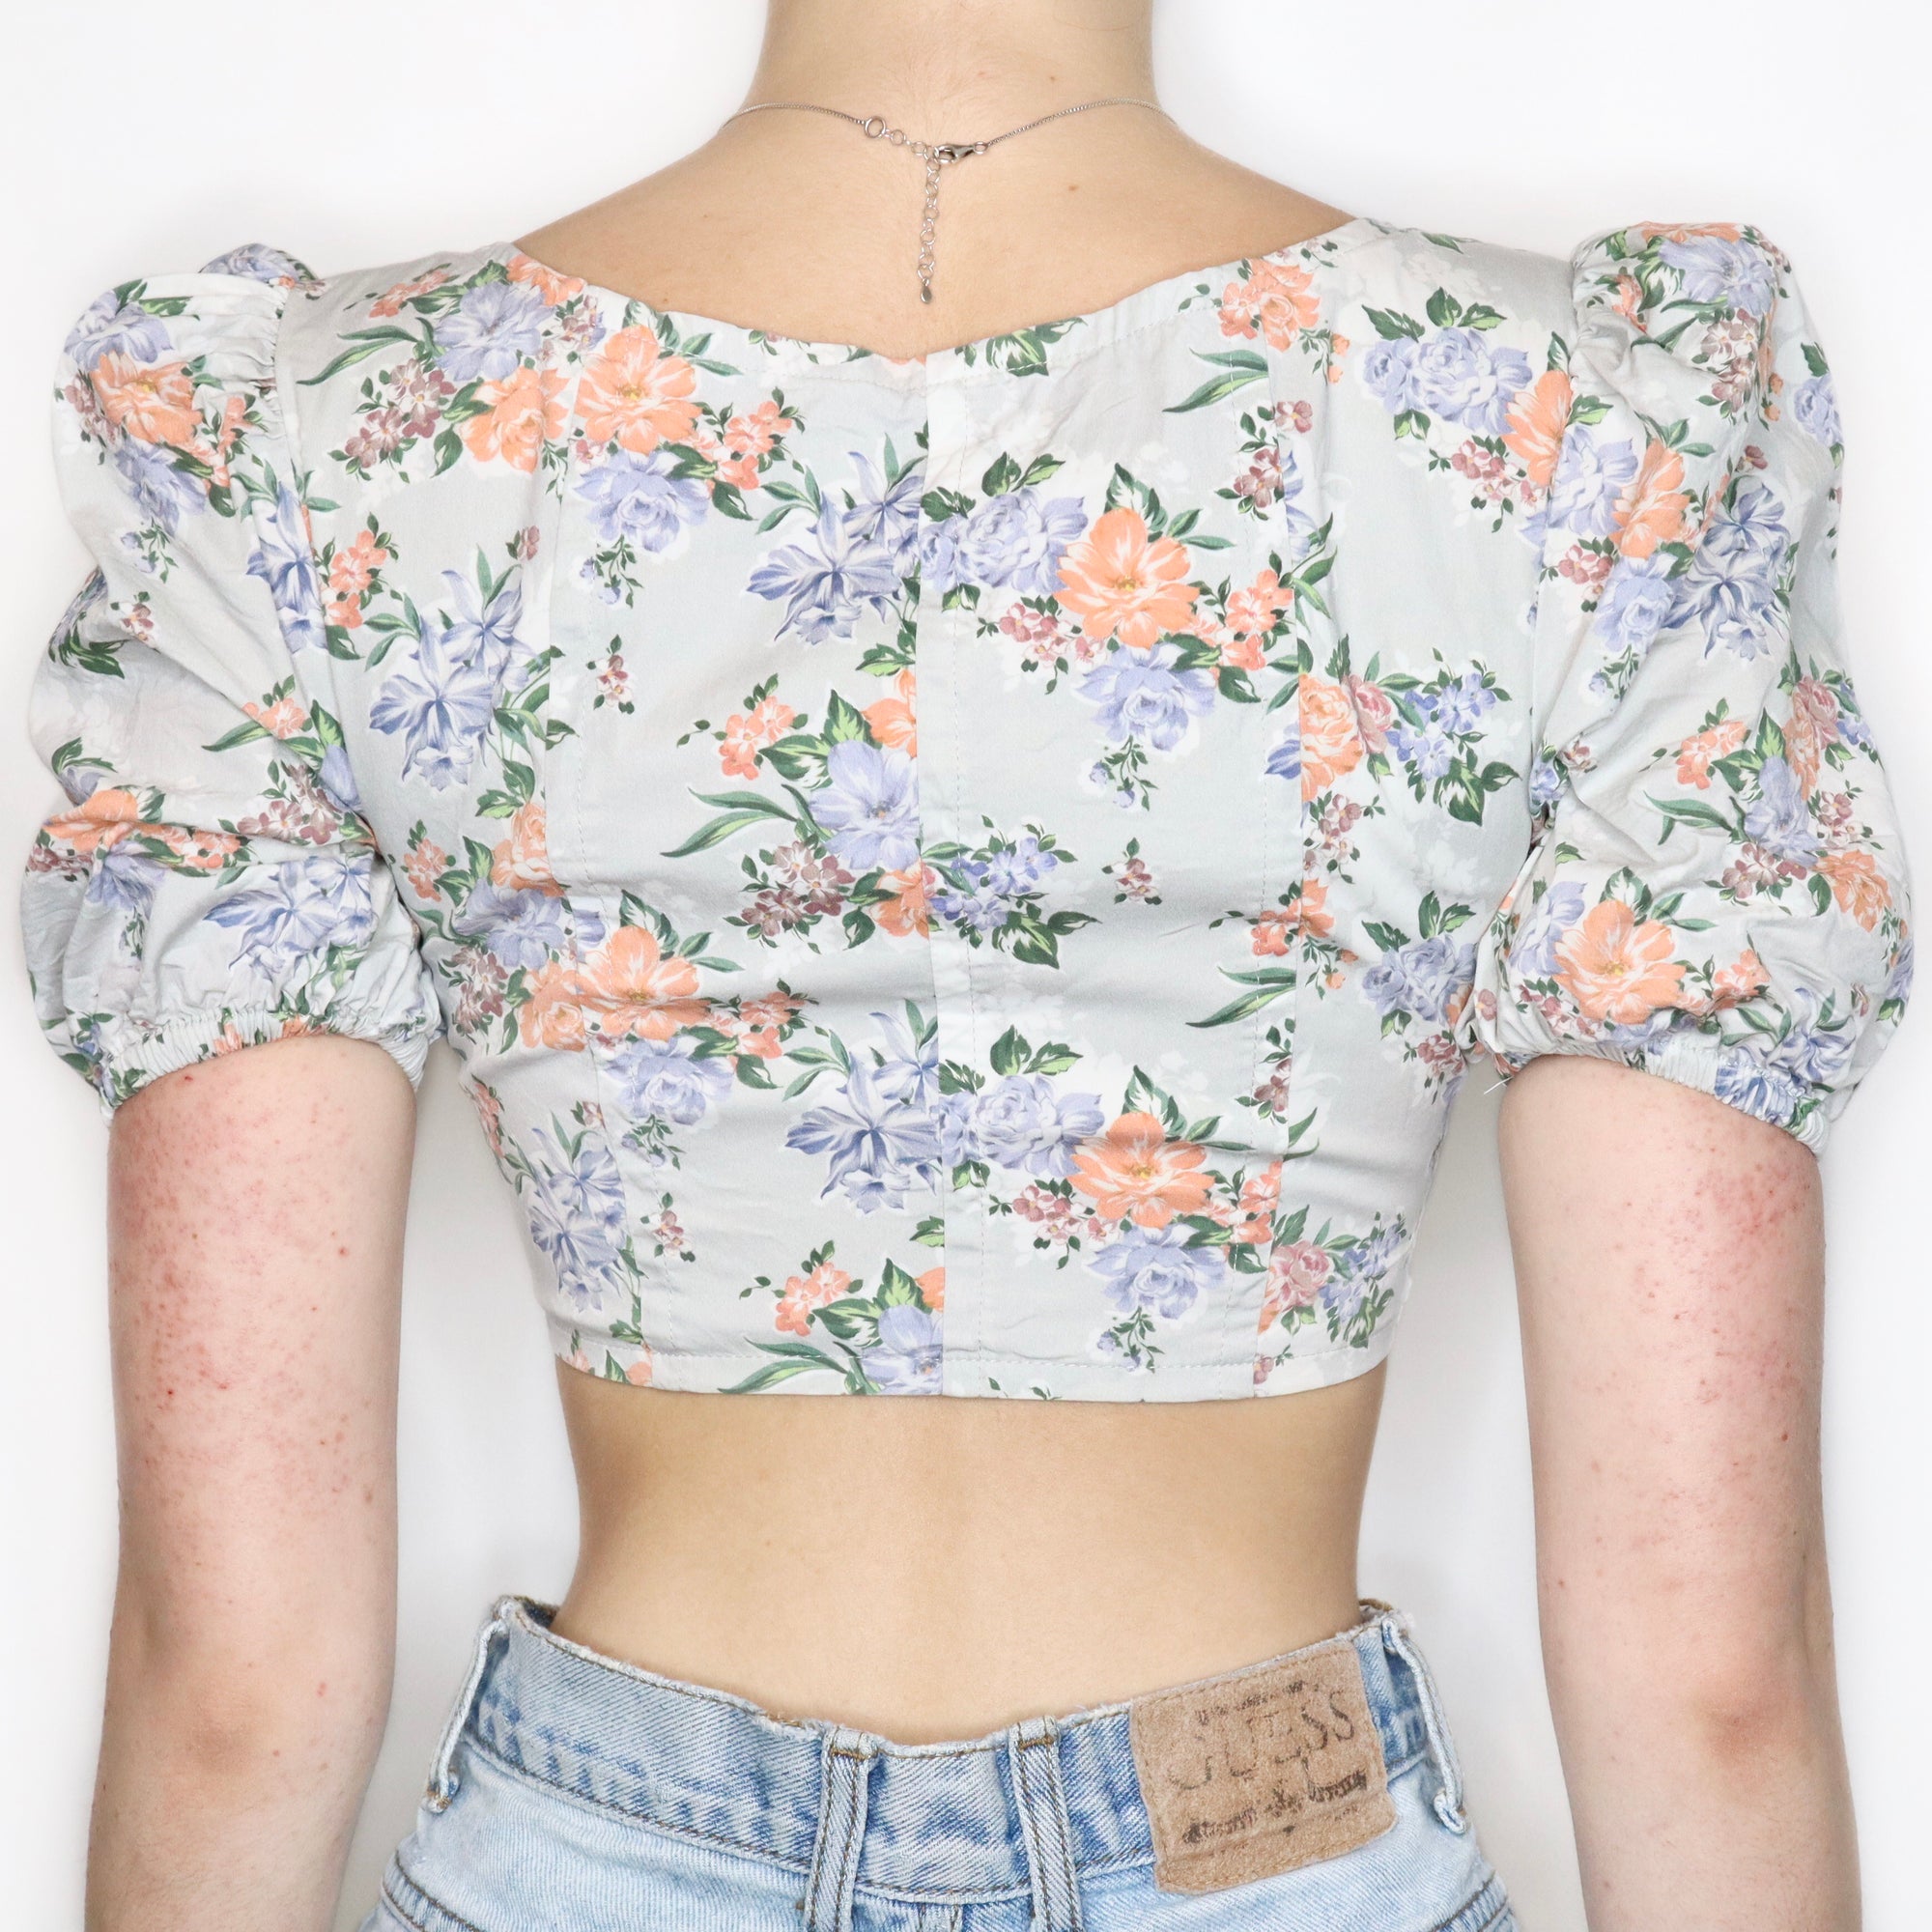 House of CB Dahlia Cropped Bustier Top